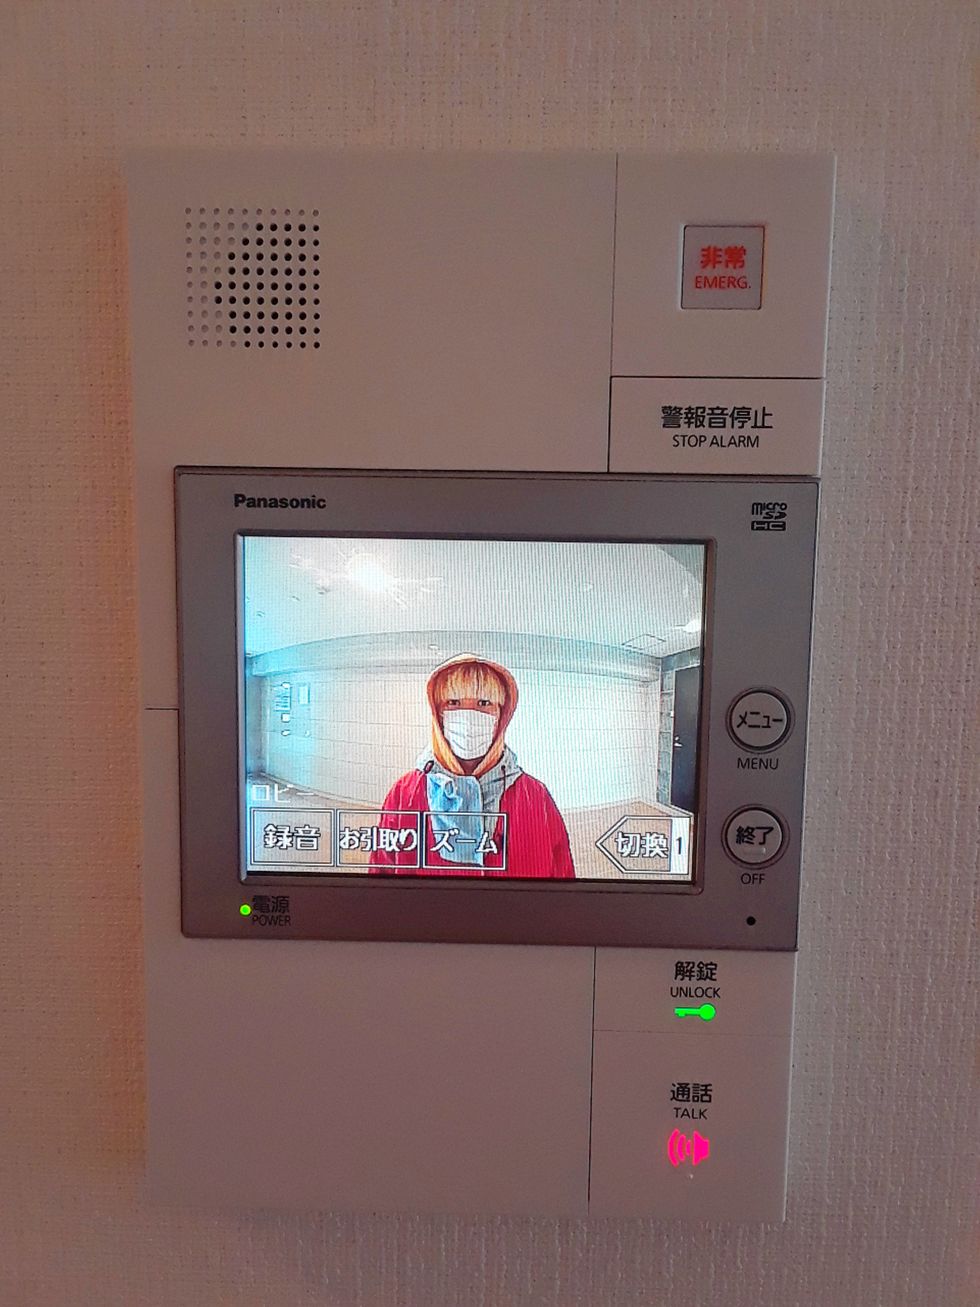 The video monitor on a door buzzer shows Mei Yamanaka looking into the camera from a hallway, wearing a voluminous red top, a medical mask, and a hood.